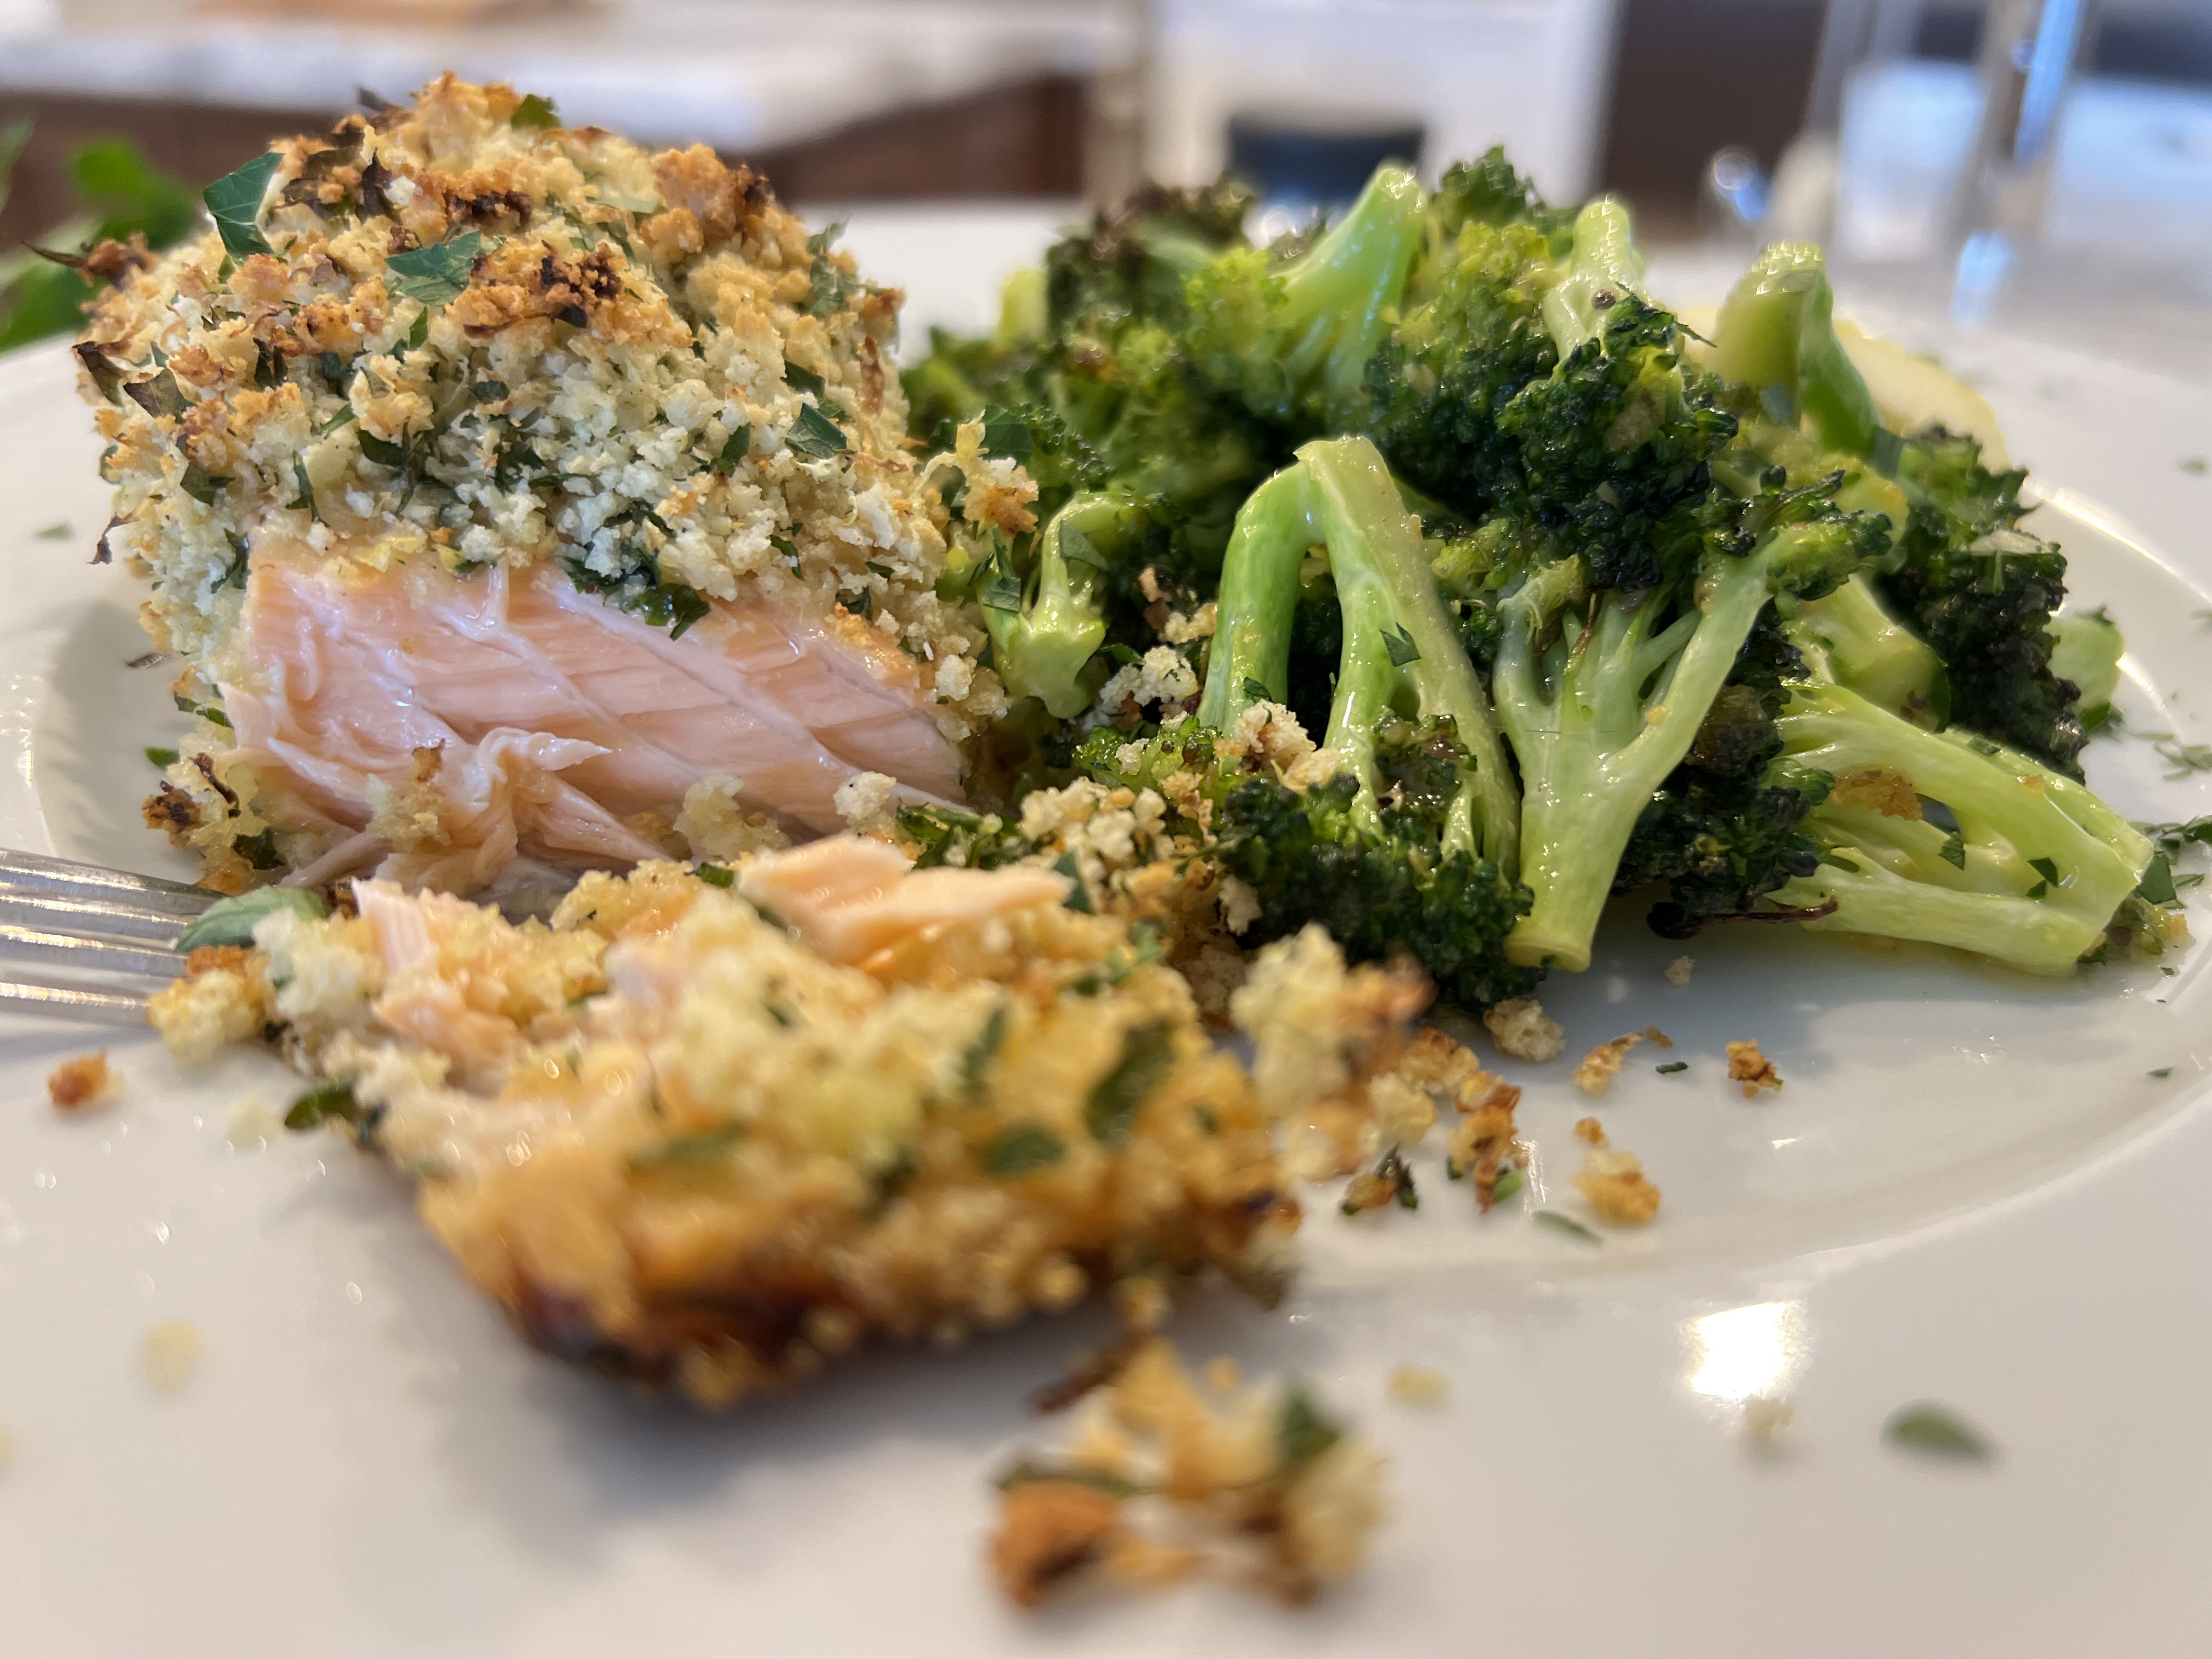 Panko Crusted Salmon With Oven Roasted Broccoli